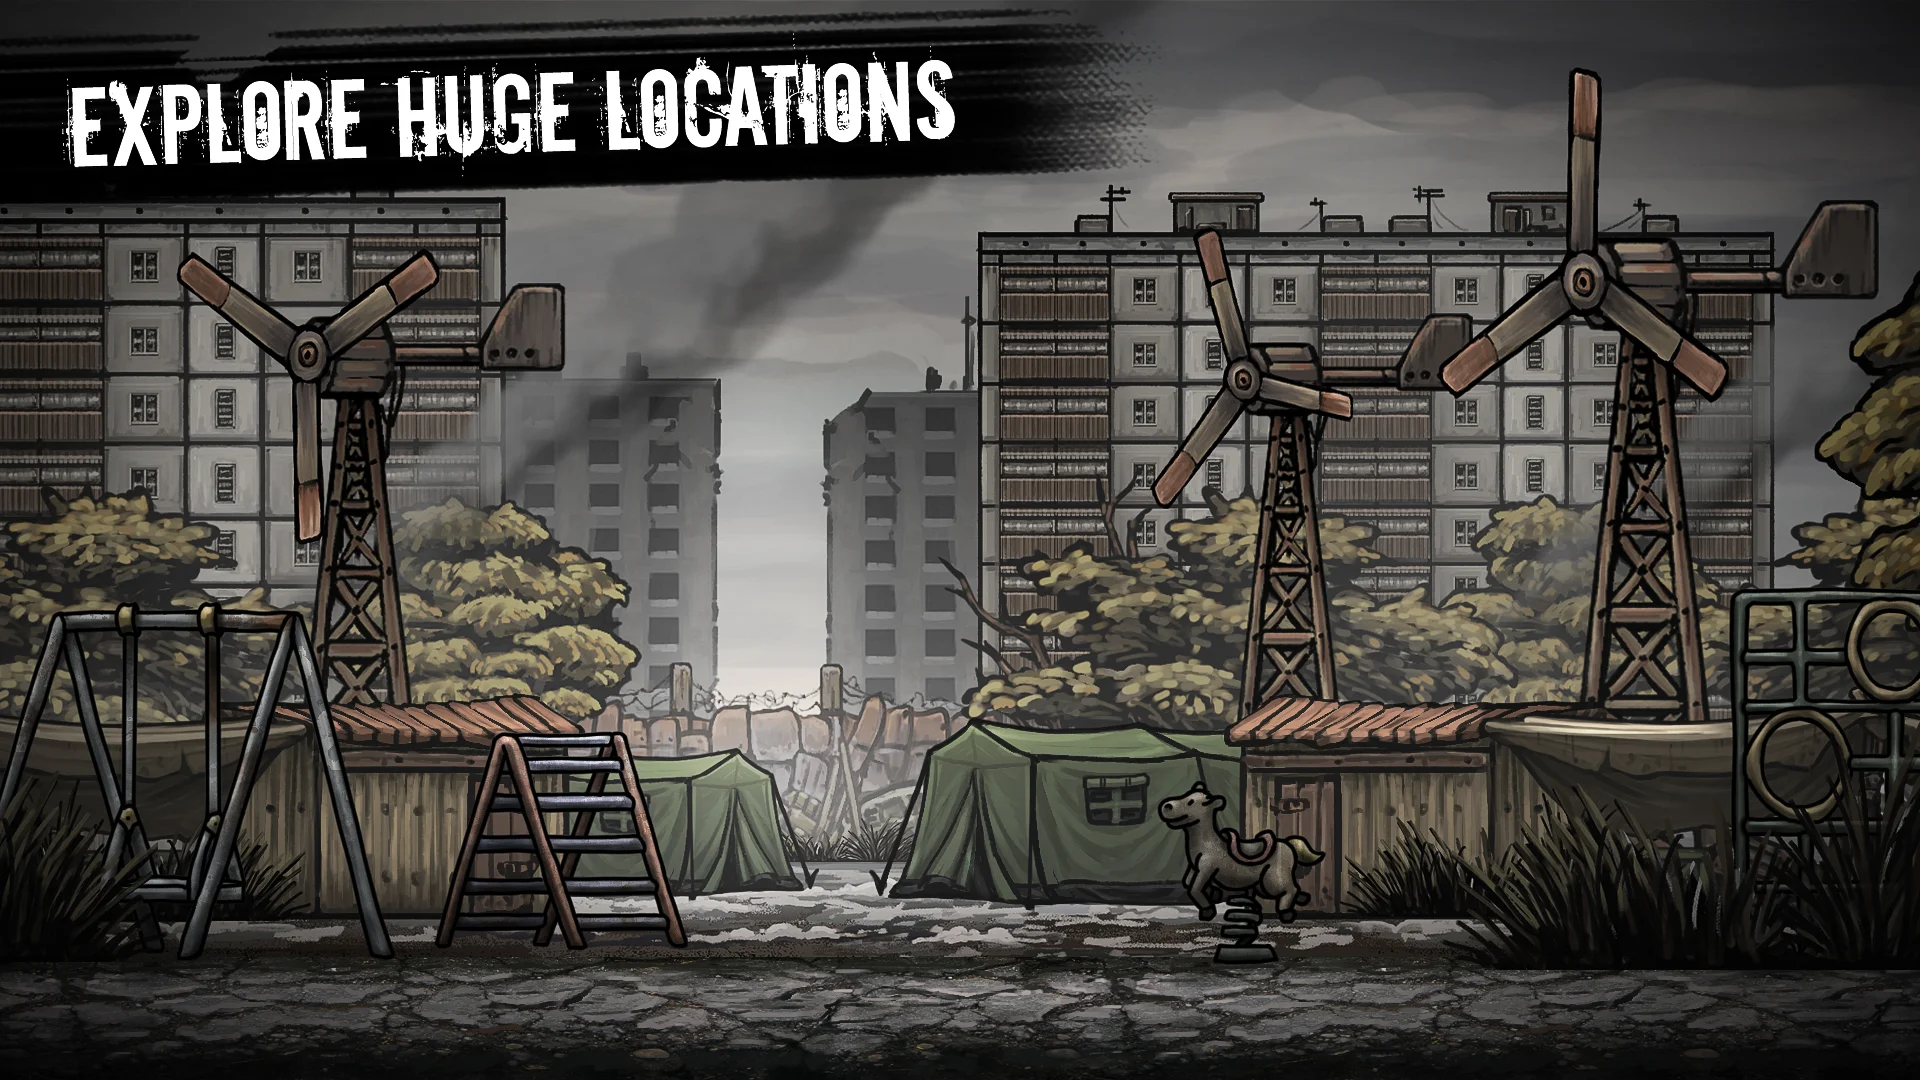 Nuclear Day Survival v0.131.0 MOD APK (Unlimited Money)